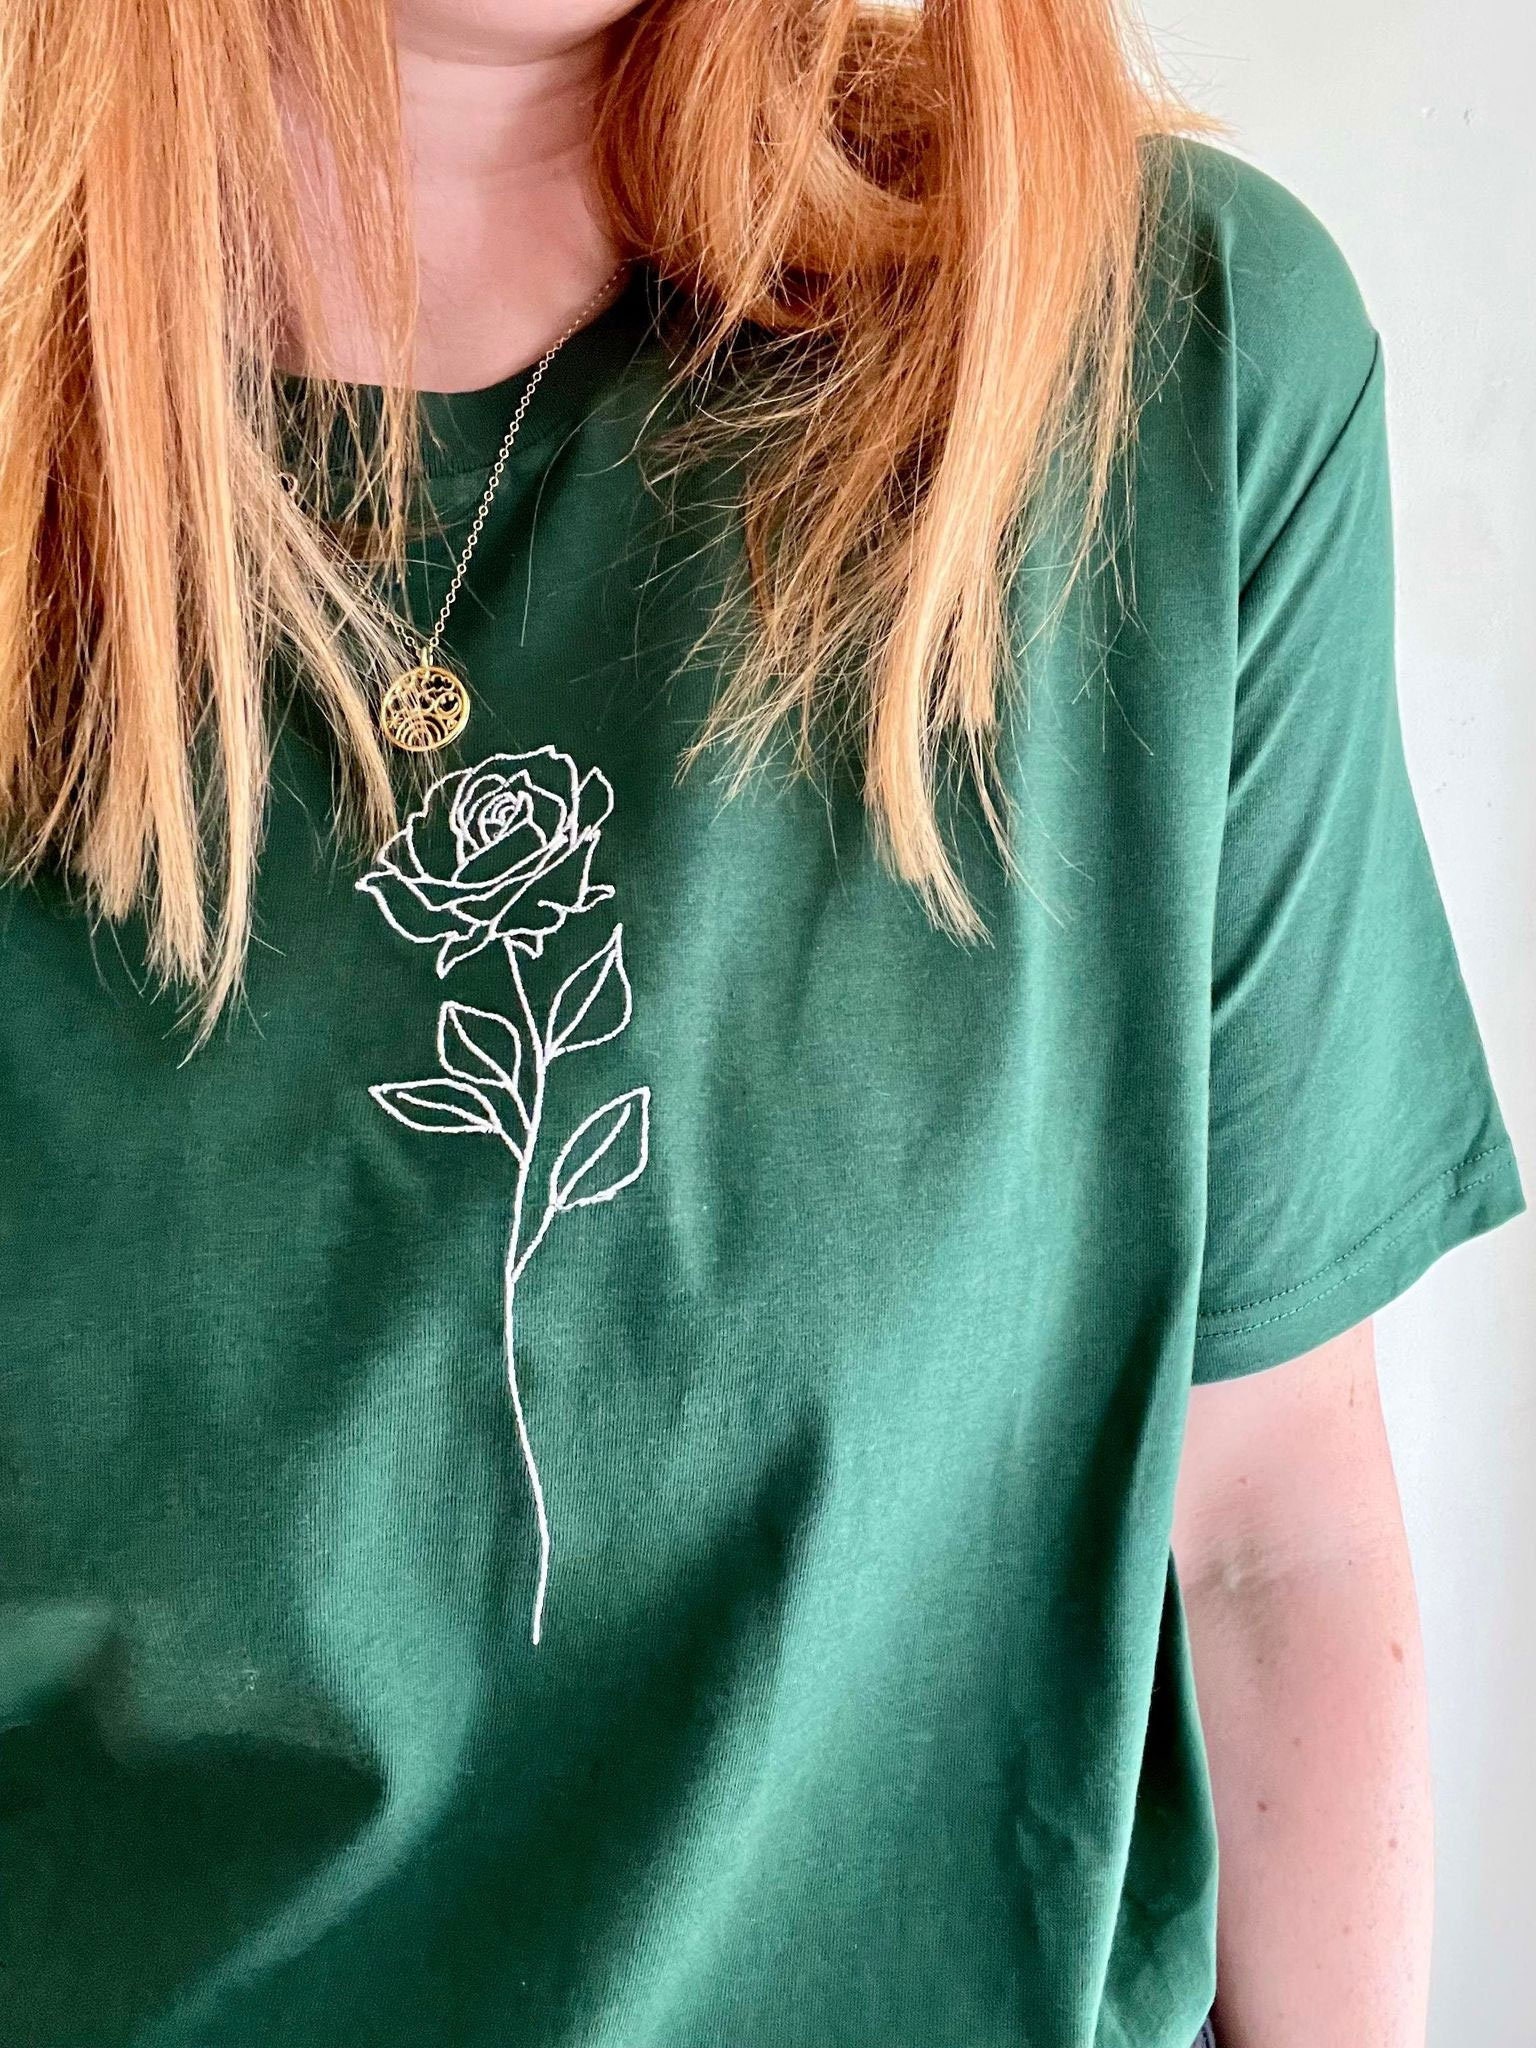 Organic Single Rose T-shirt Embroidered Designs Hand Drawn Rose Sustainable  Clothing Soft Unique Top - Etsy